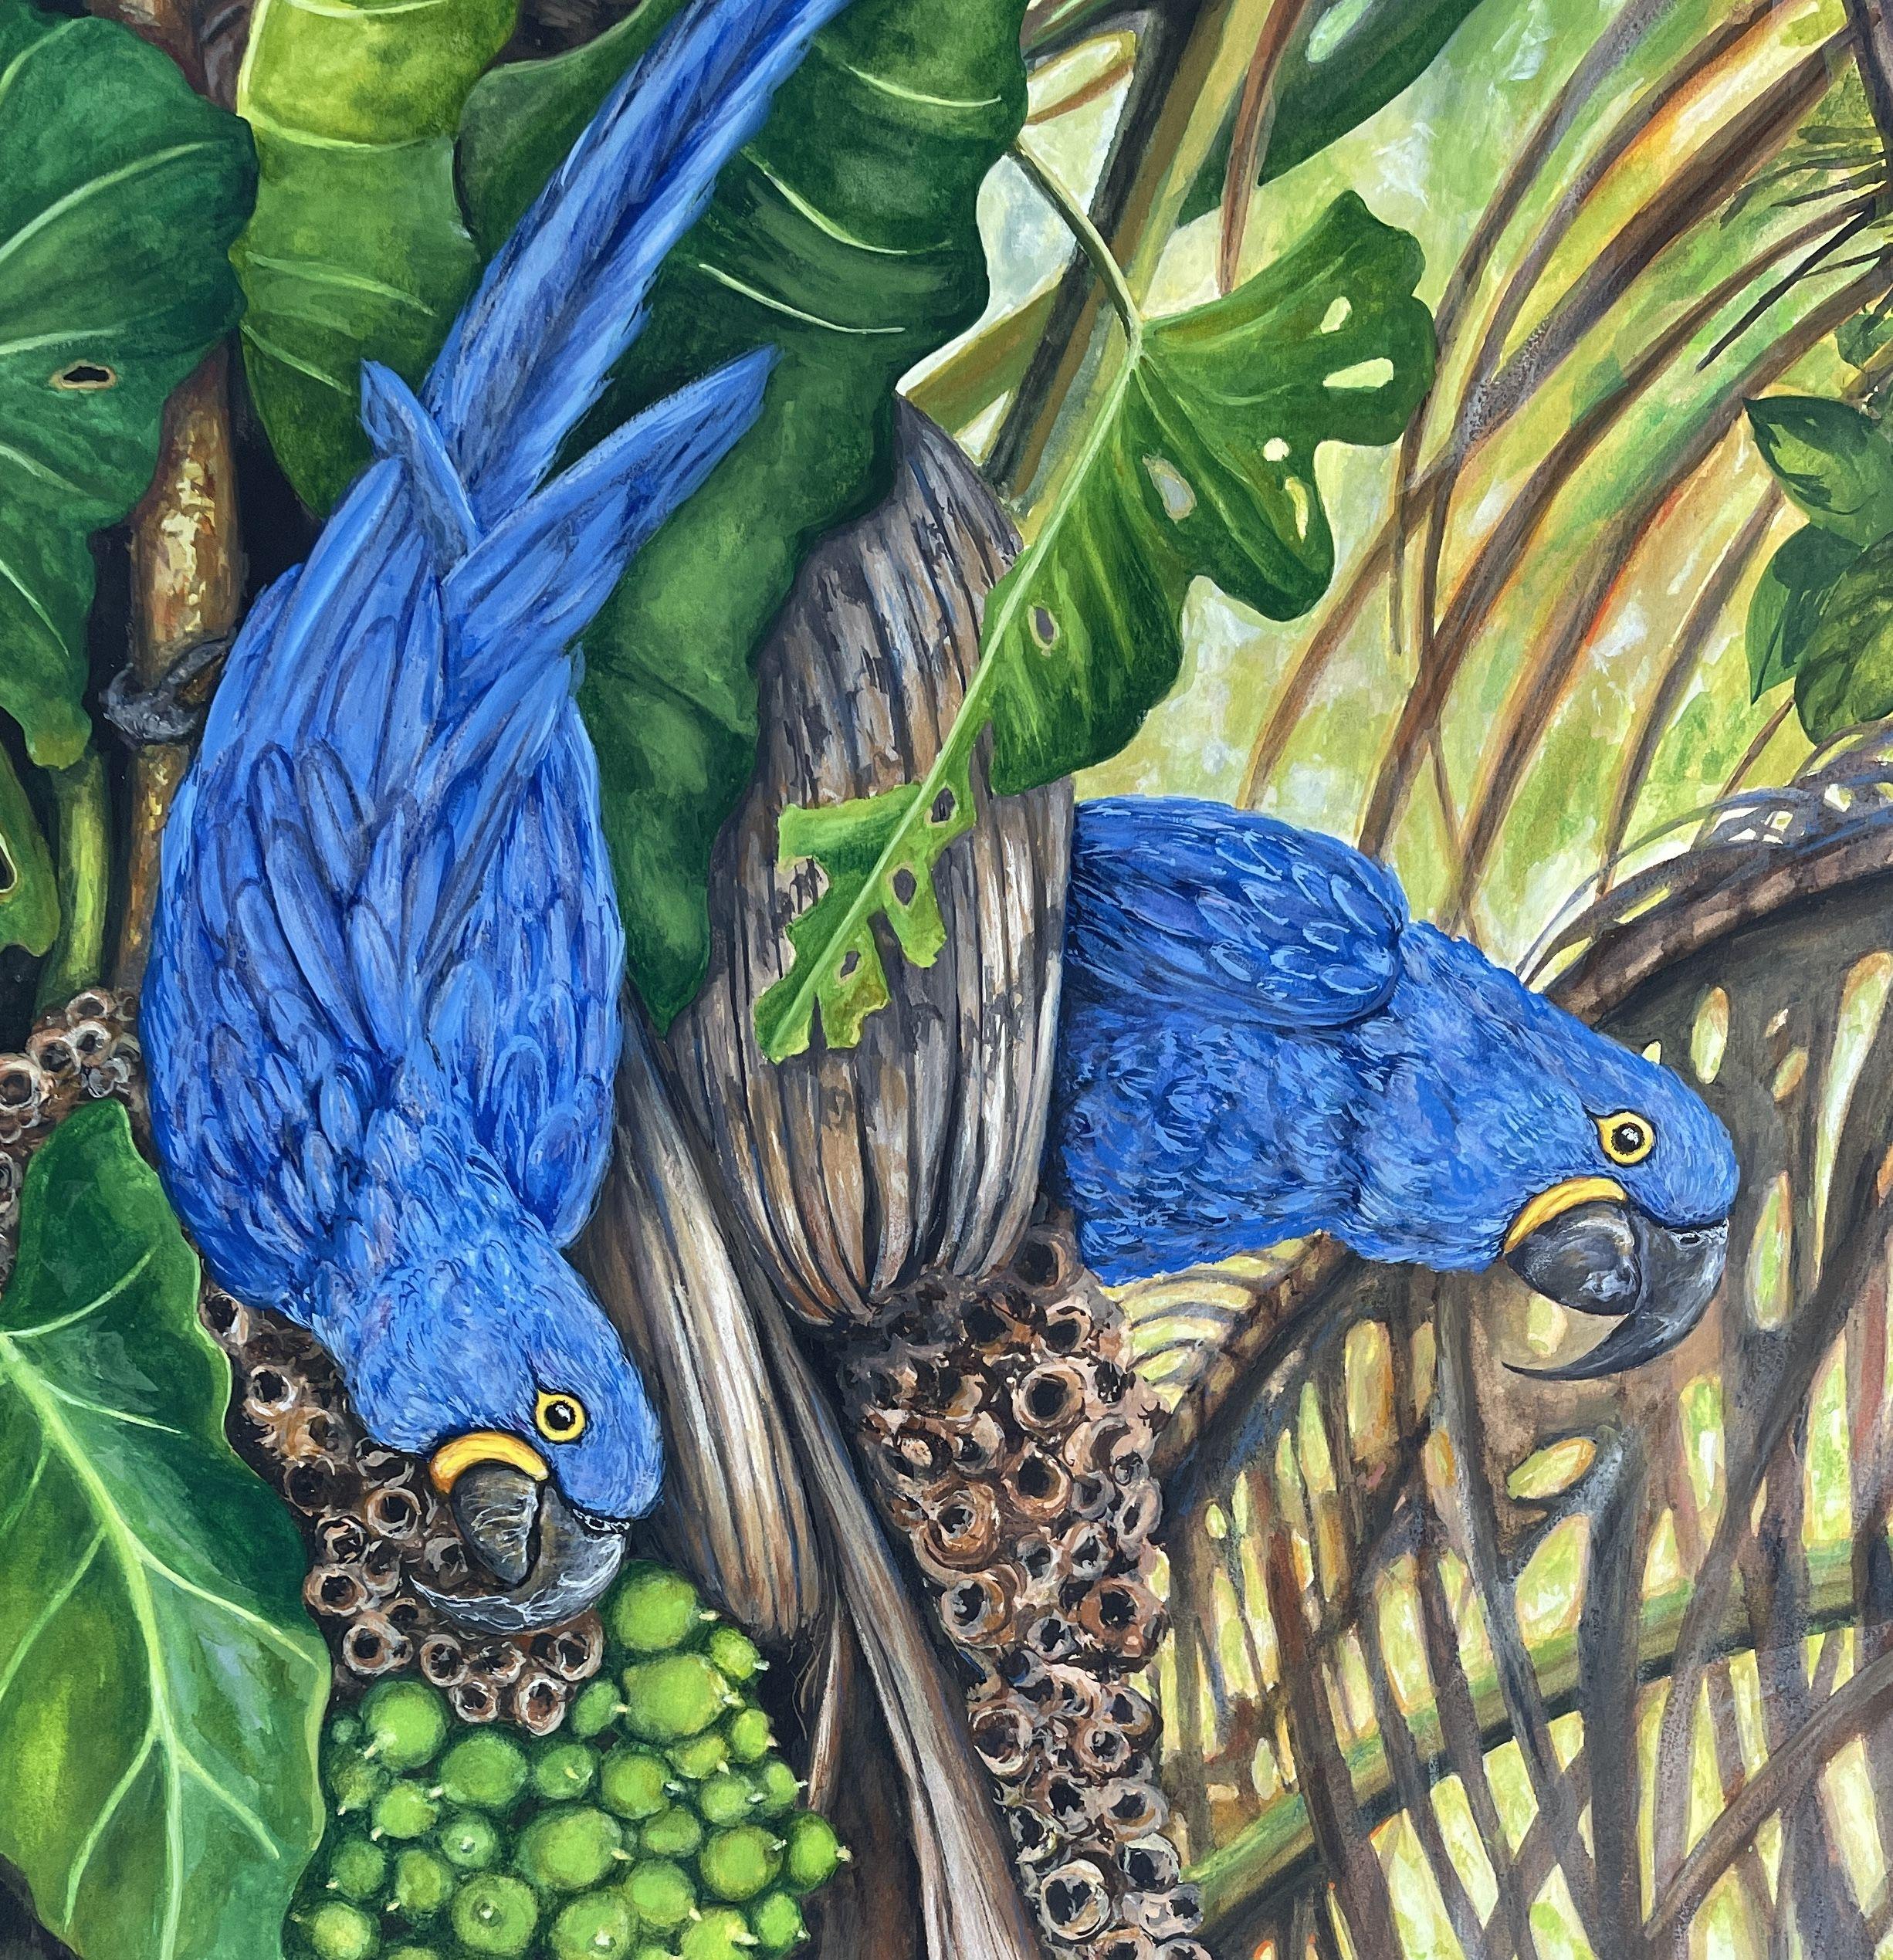 A highly detailed original watercolor painting of 2 hyacinth macaws feasting on acuri palm nuts which is one of their favorite foods.  These birds are native to central and eastern South America, they can be found in abundance in Pantanal, the